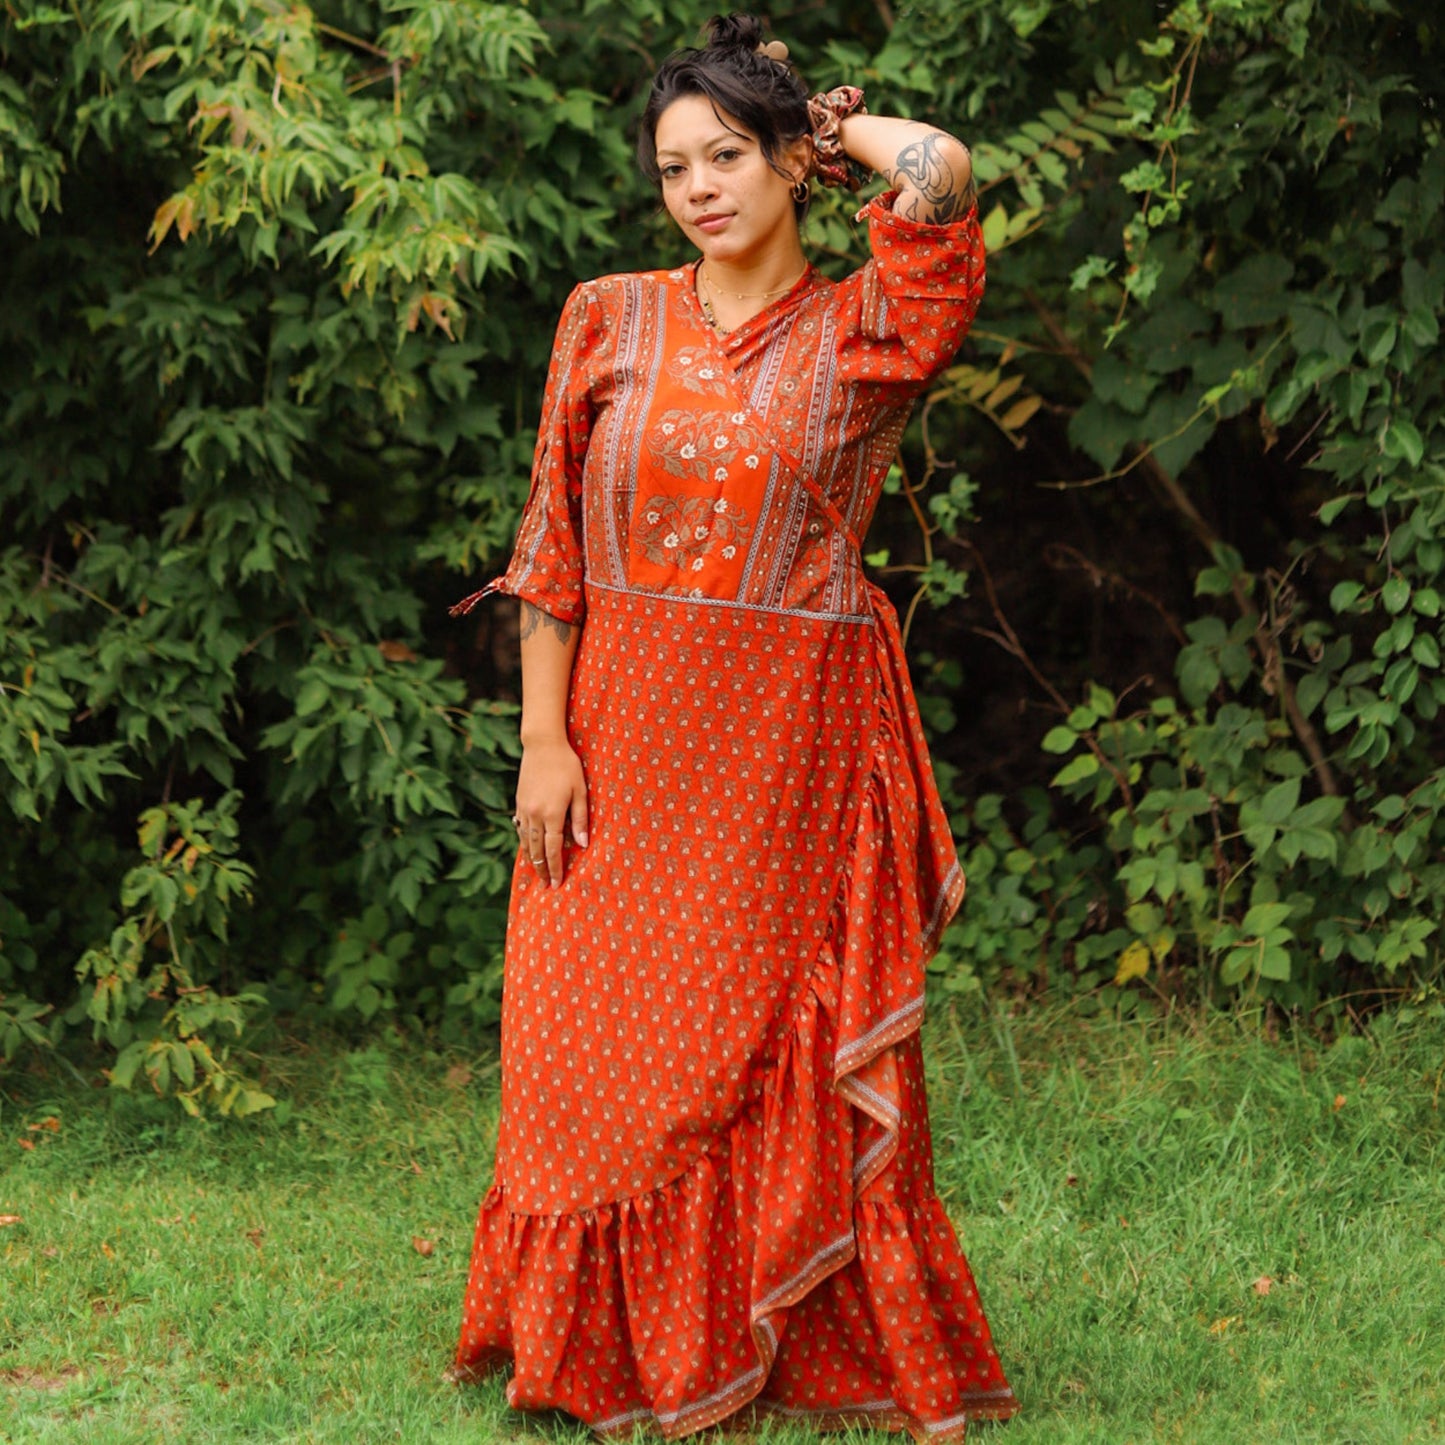 A model standing in a forest wearing a Burnt Red Floral Sari Wrap Dress. She has a matching Sari Silk Scrunchie on her wrist.